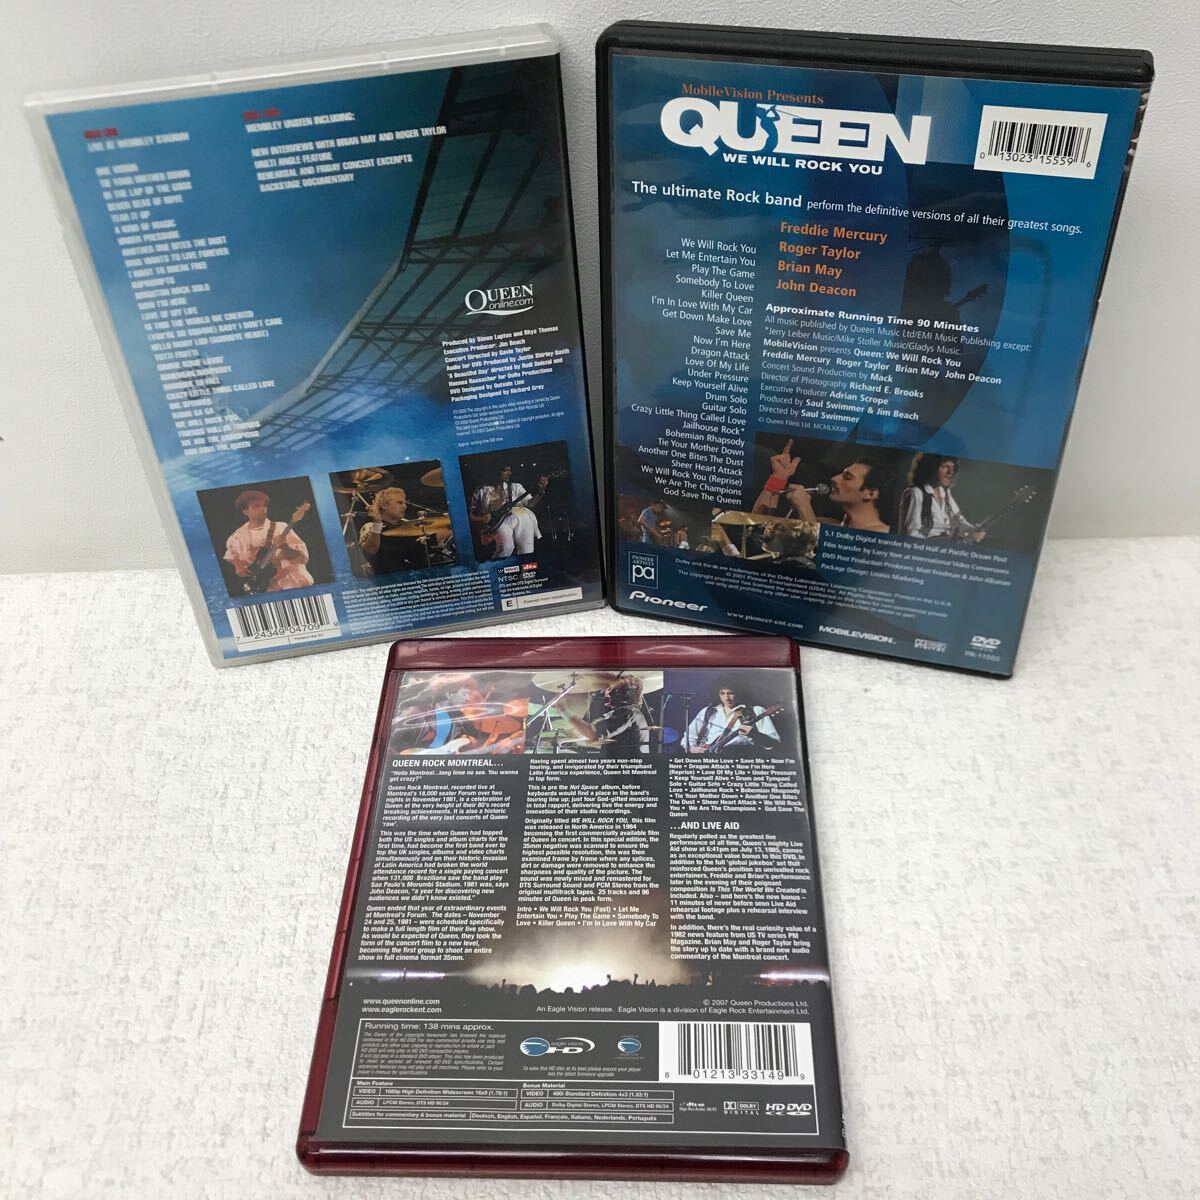 I0513A3 QUEEN Queen DVD 3 volume set cell version music western-style music LIVE AT WEMBLEY STADIUM / WE WILL ROCK YOU / ROCK MONTREAL & LIVE AID